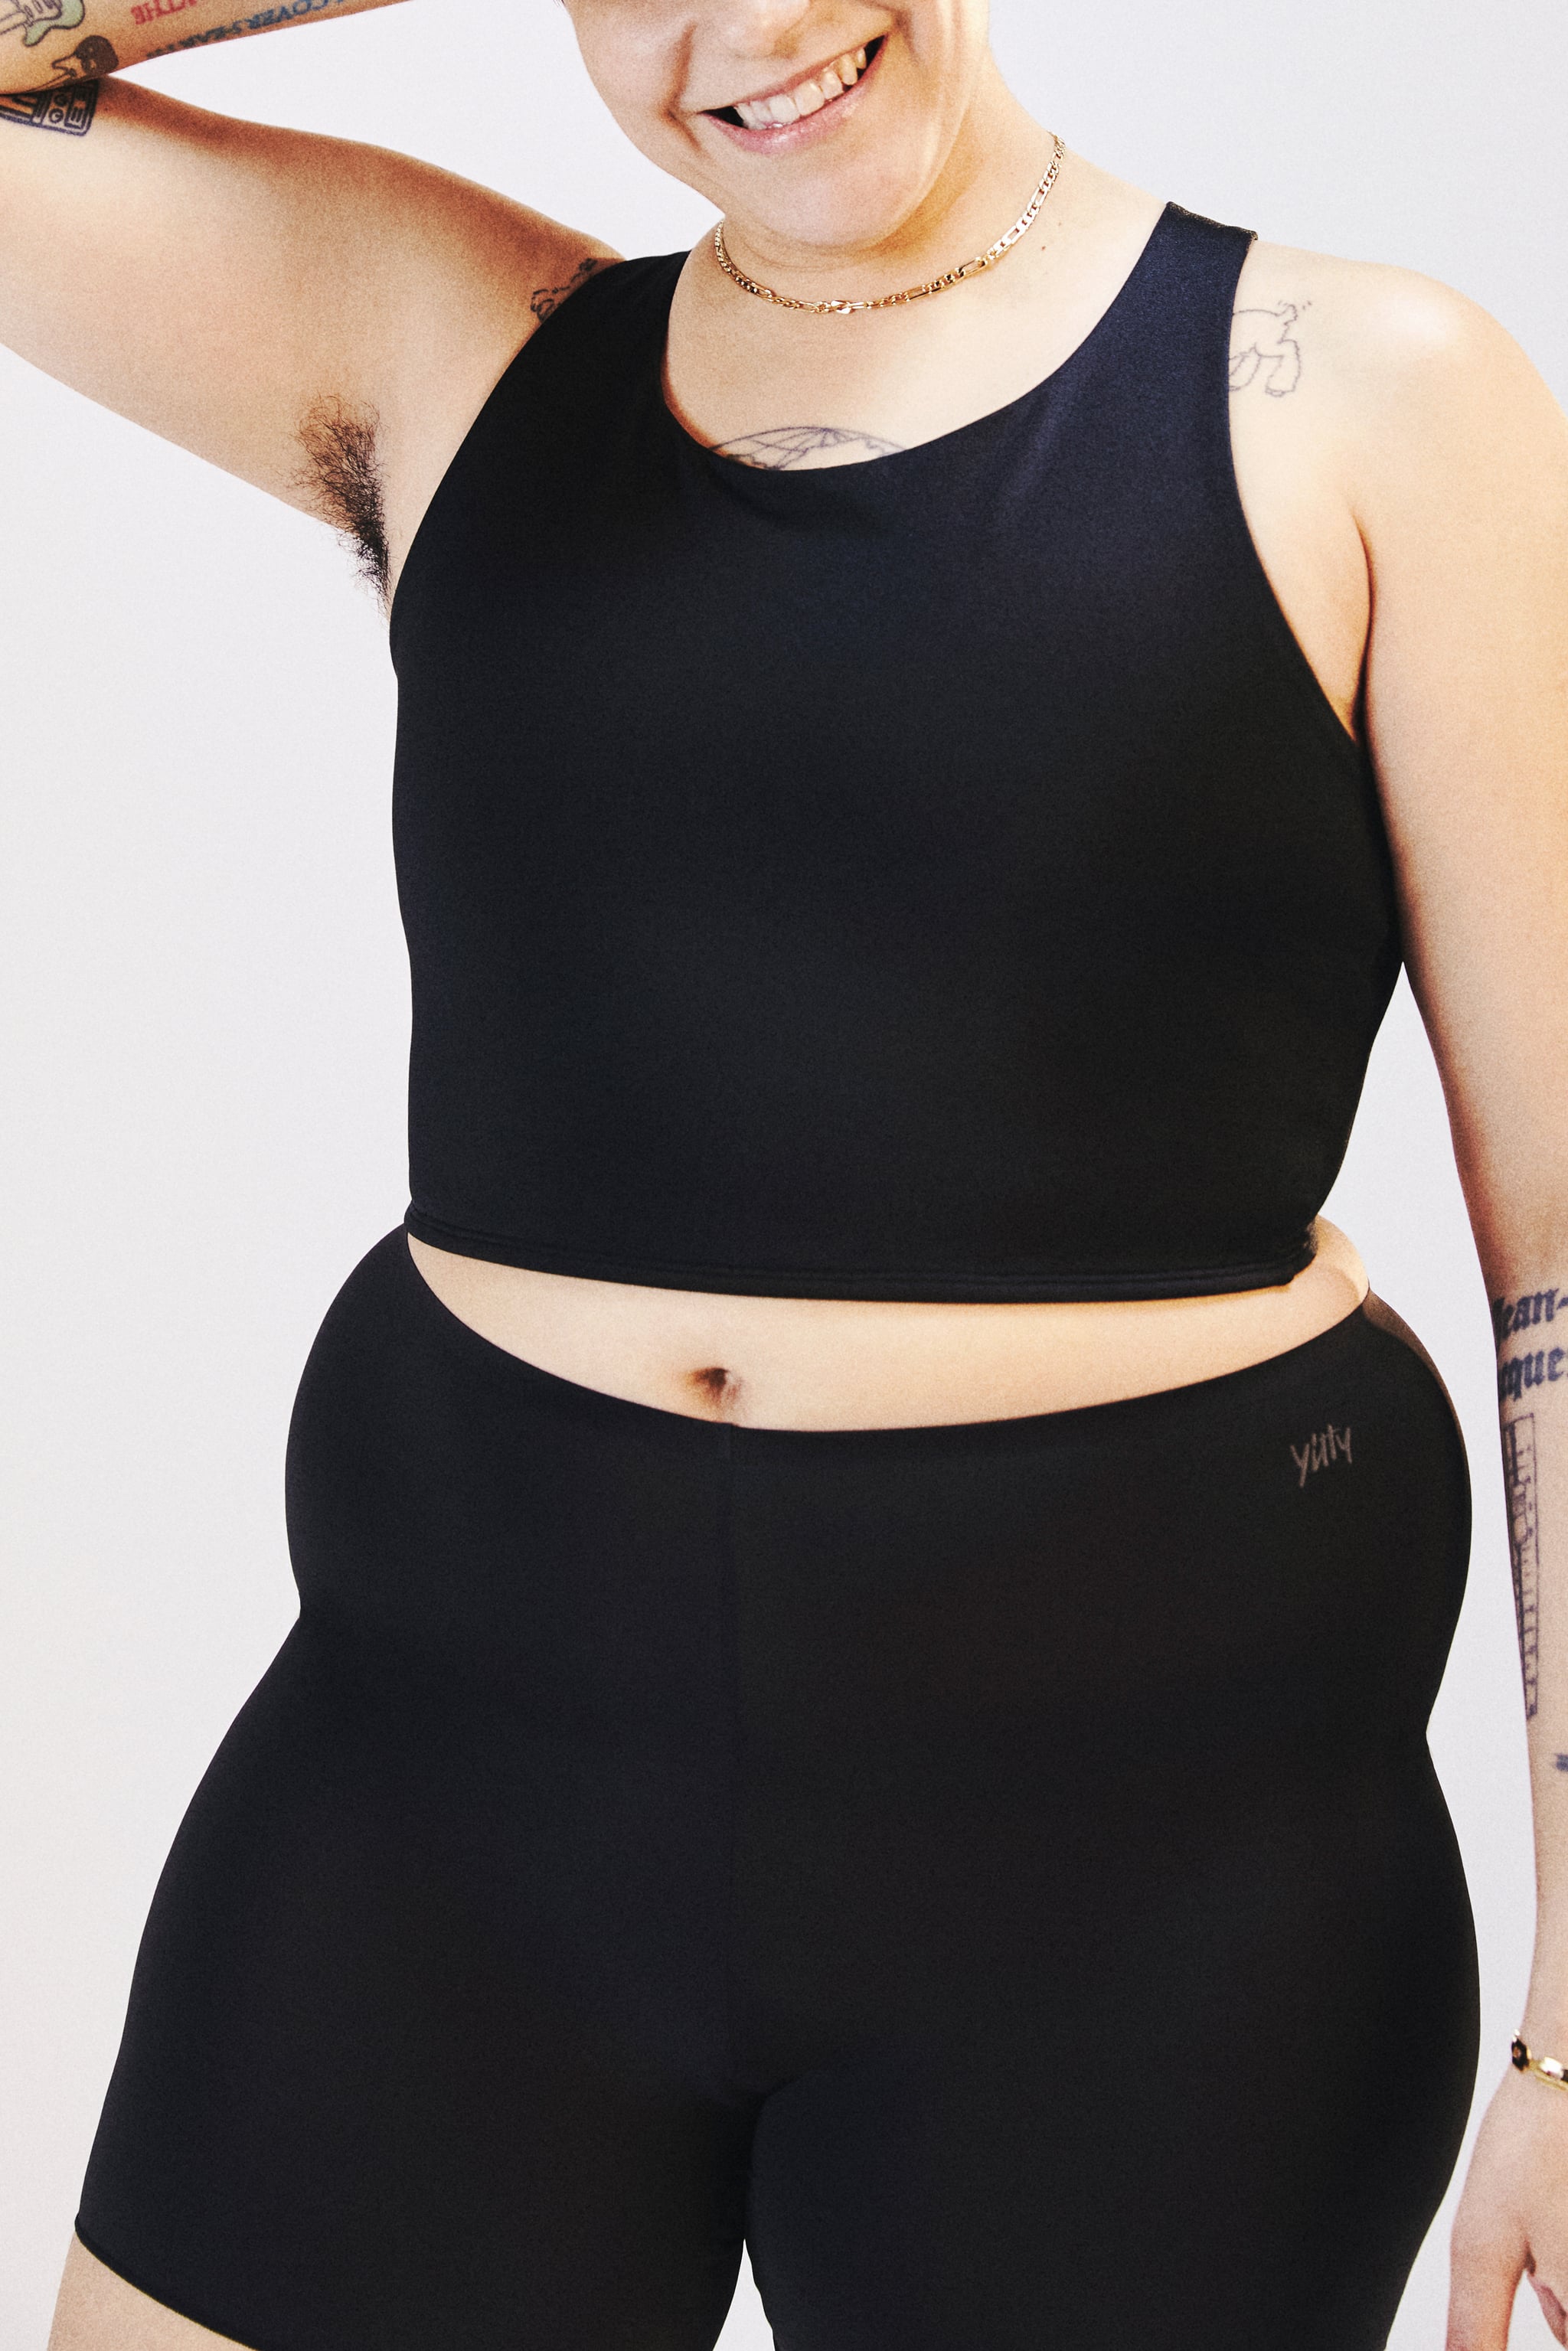 Fashion, Shopping & Style, Lizzo Is Launching Gender-Affirming Shapewear  With Yitty